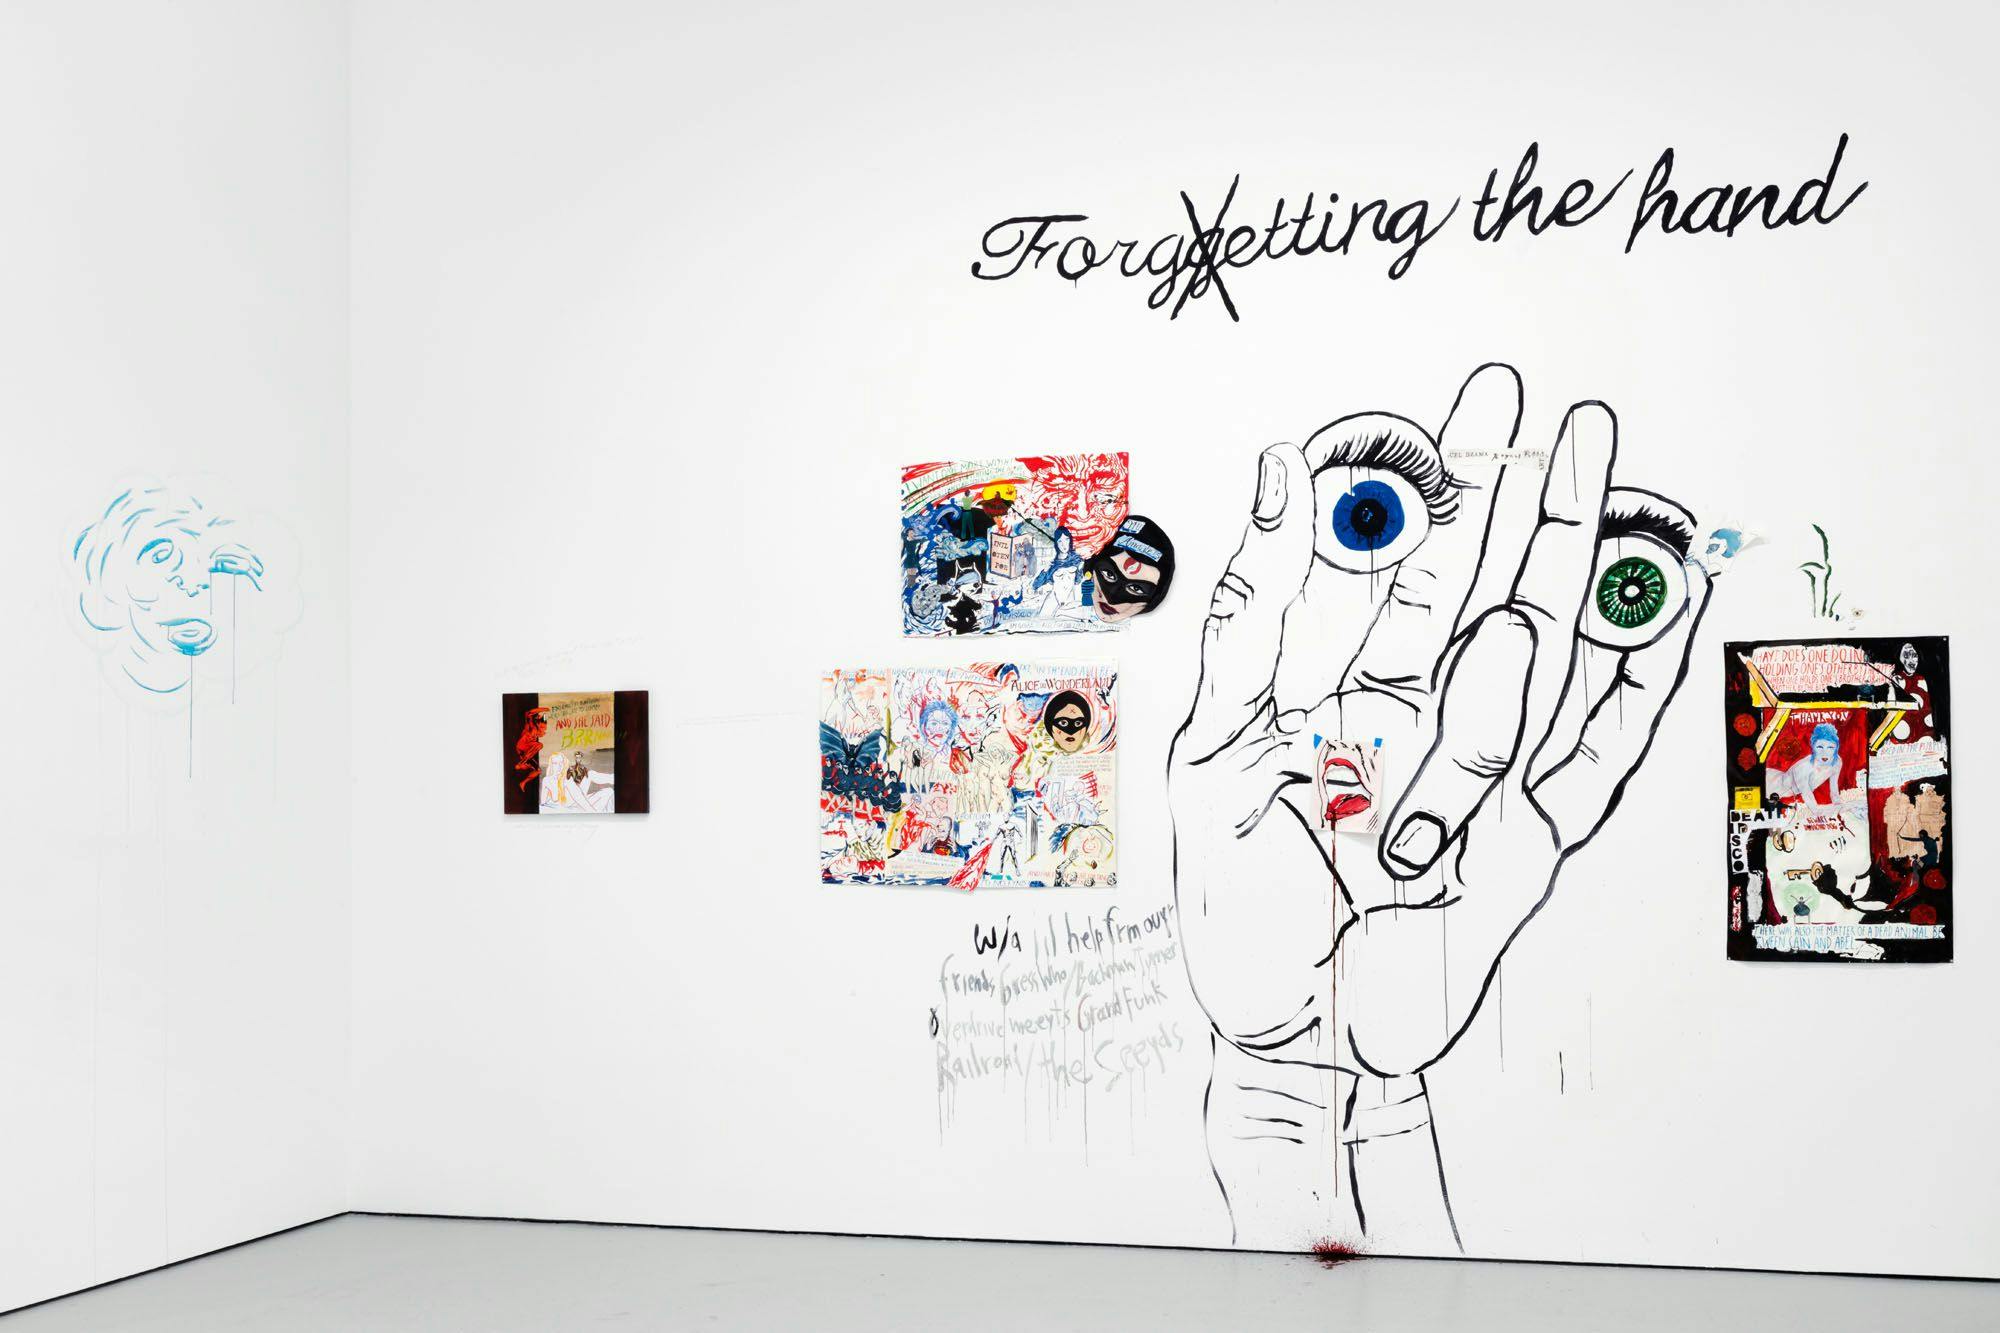 Installation view of the exhibition, Forgetting The Hand, at David Zwirner in New York, dated 2016.